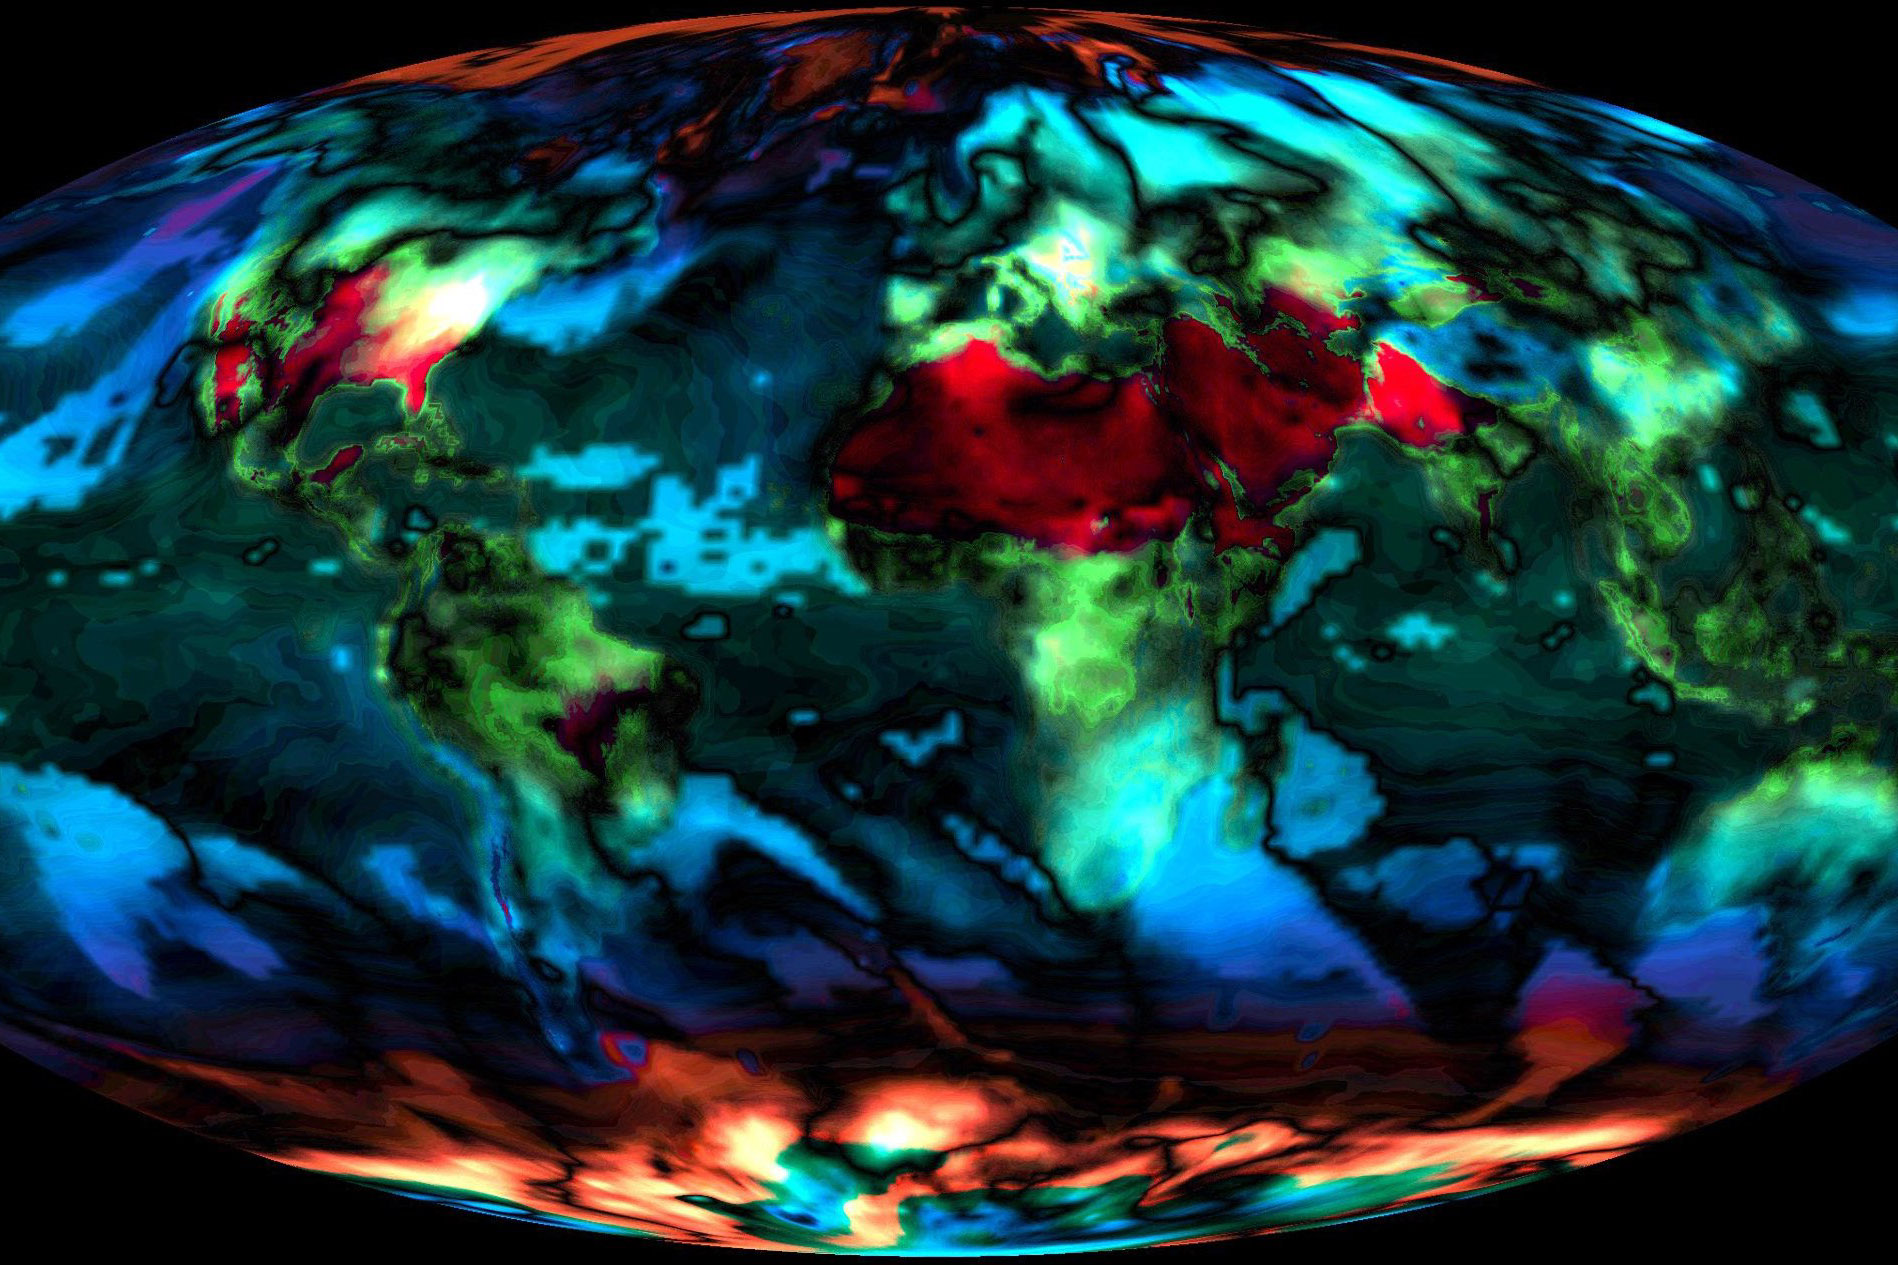 Modeling of Earth's temperature changes between 2014 and 2099